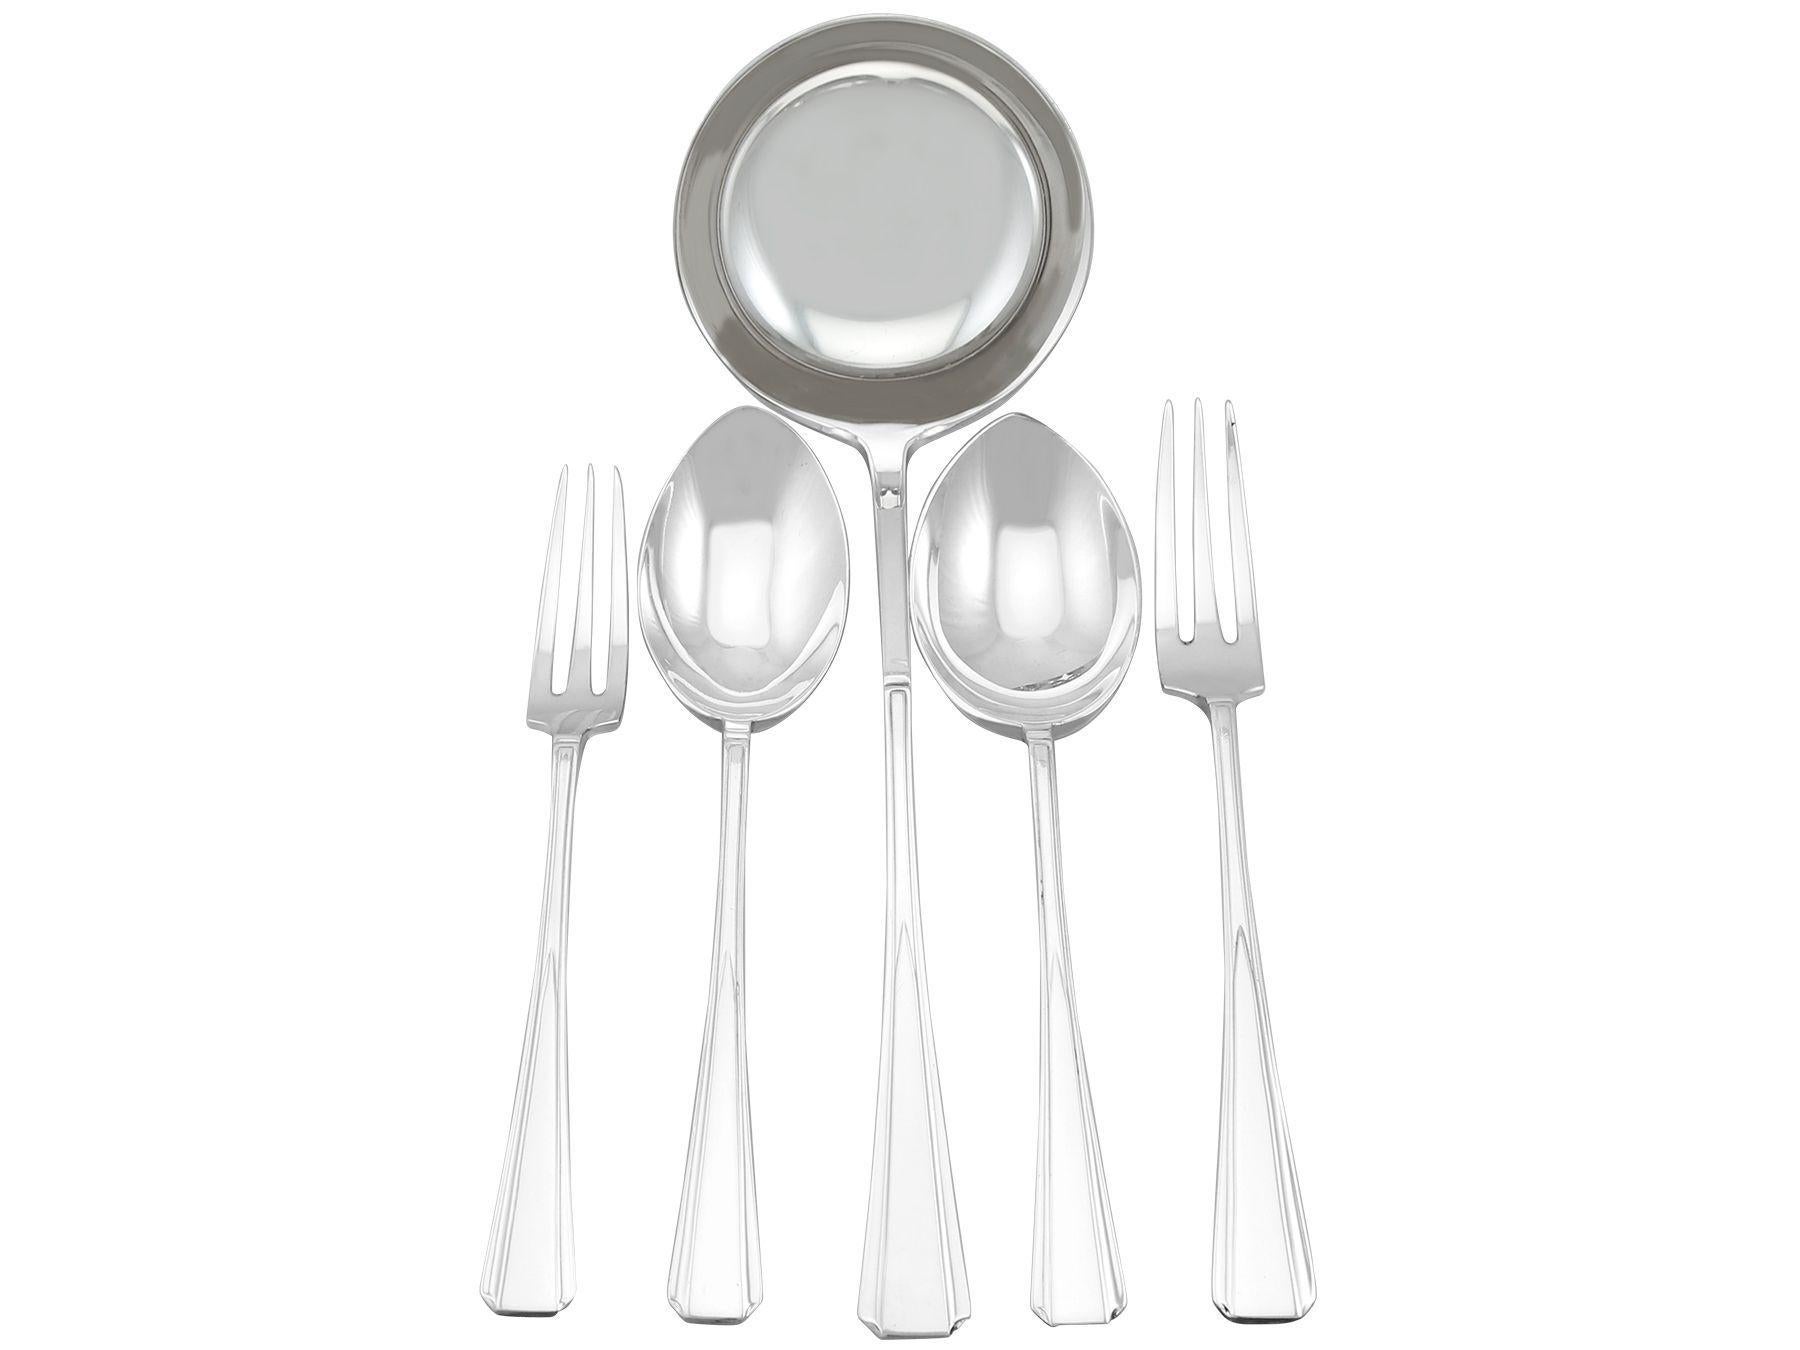 An exceptional, fine and impressive vintage sterling silver Plain Pine pattern flatware service for twelve persons, in the Art Deco style; an addition to our canteen of cutlery collection.

The pieces of this exceptional vintage George VI silver